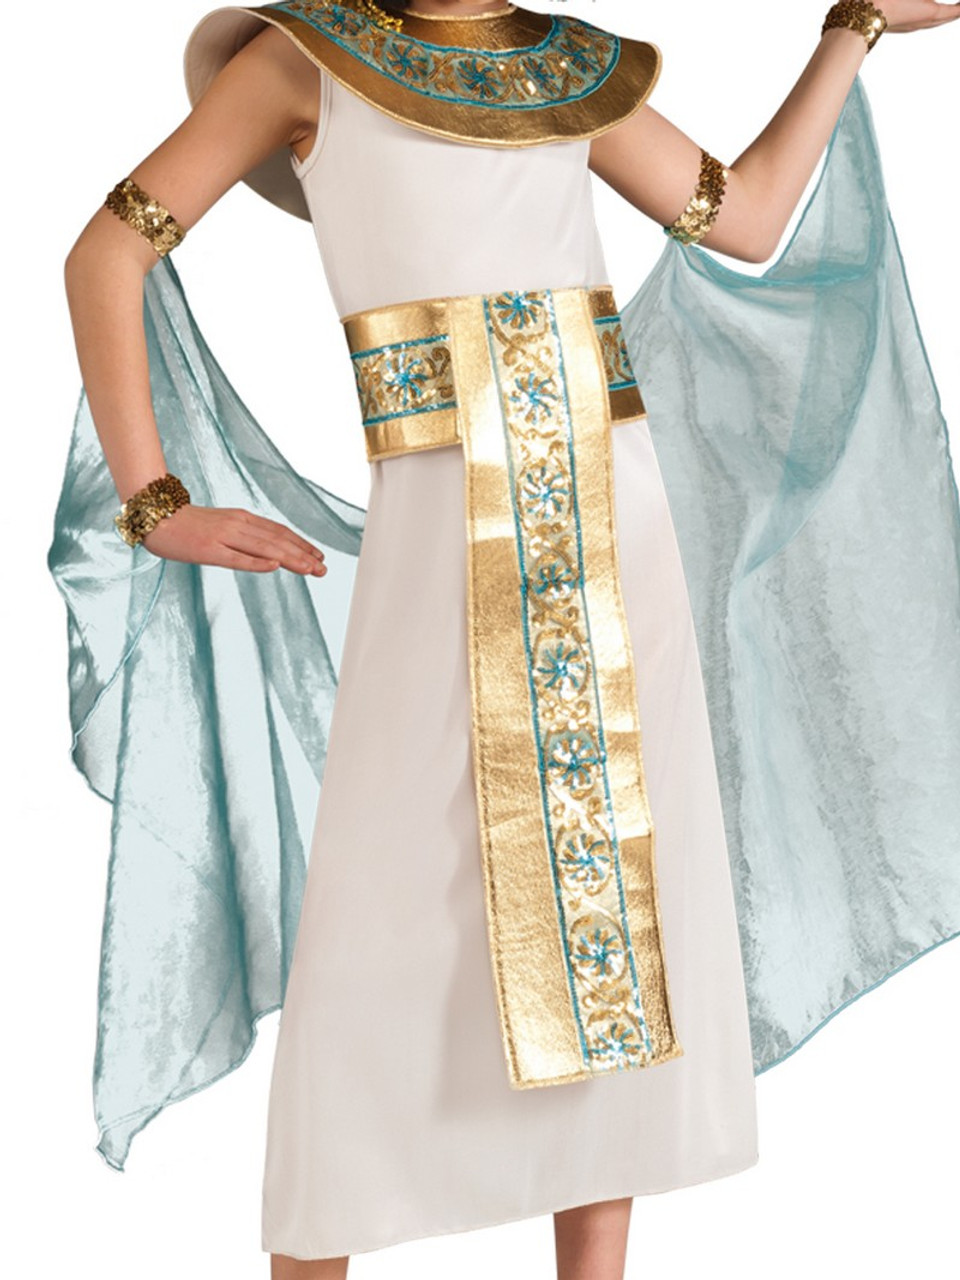 Girl's Cleopatra Costume Inset